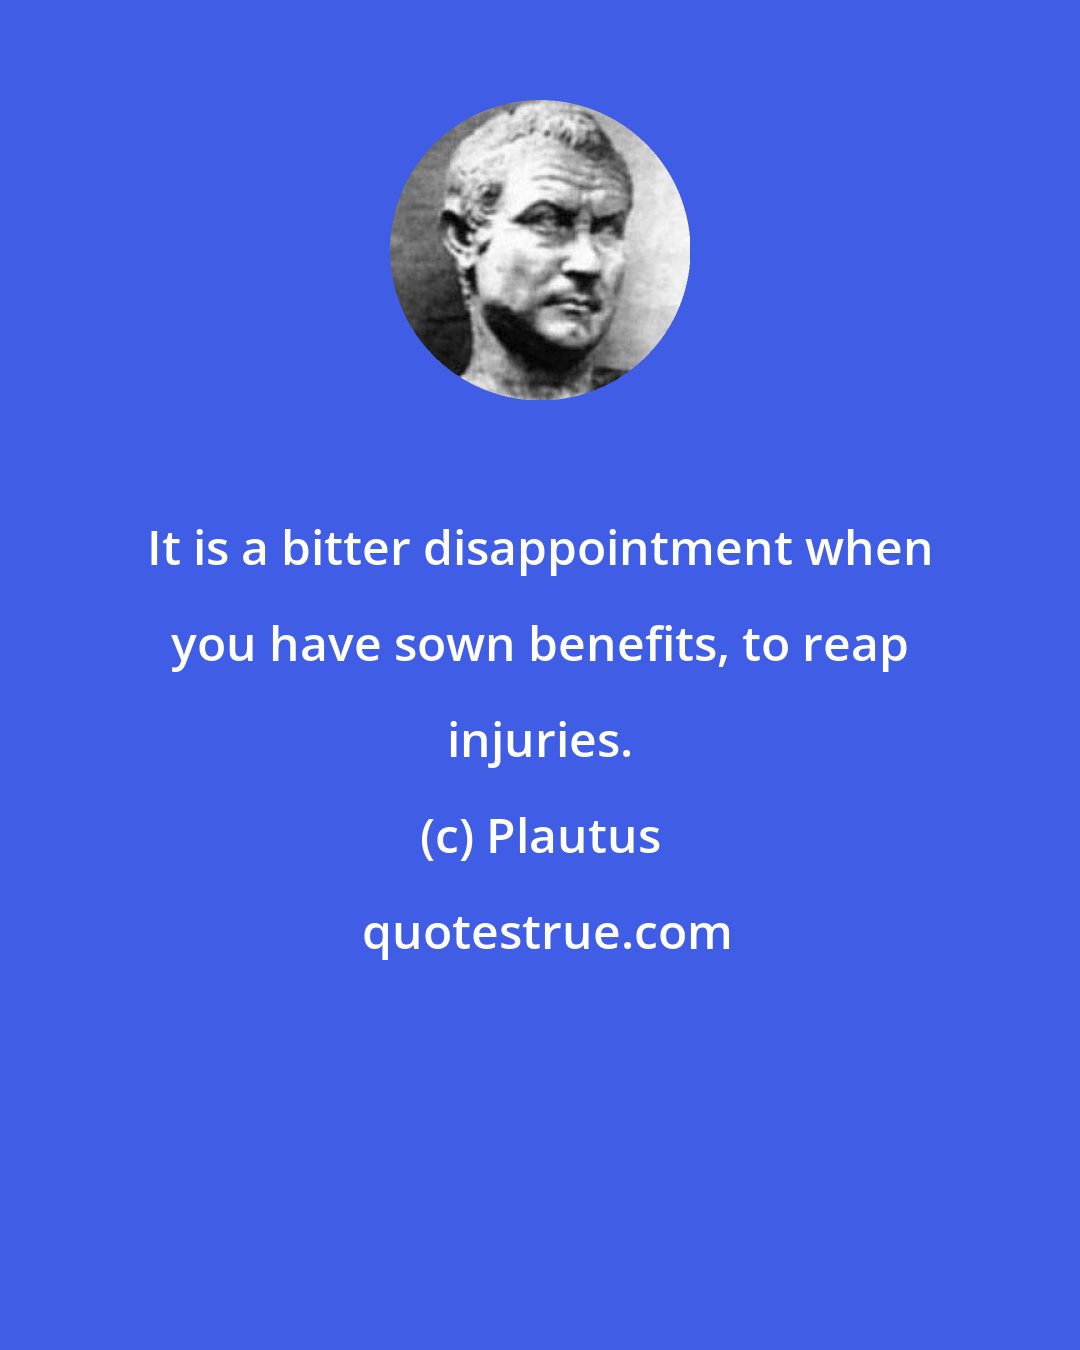 Plautus: It is a bitter disappointment when you have sown benefits, to reap injuries.